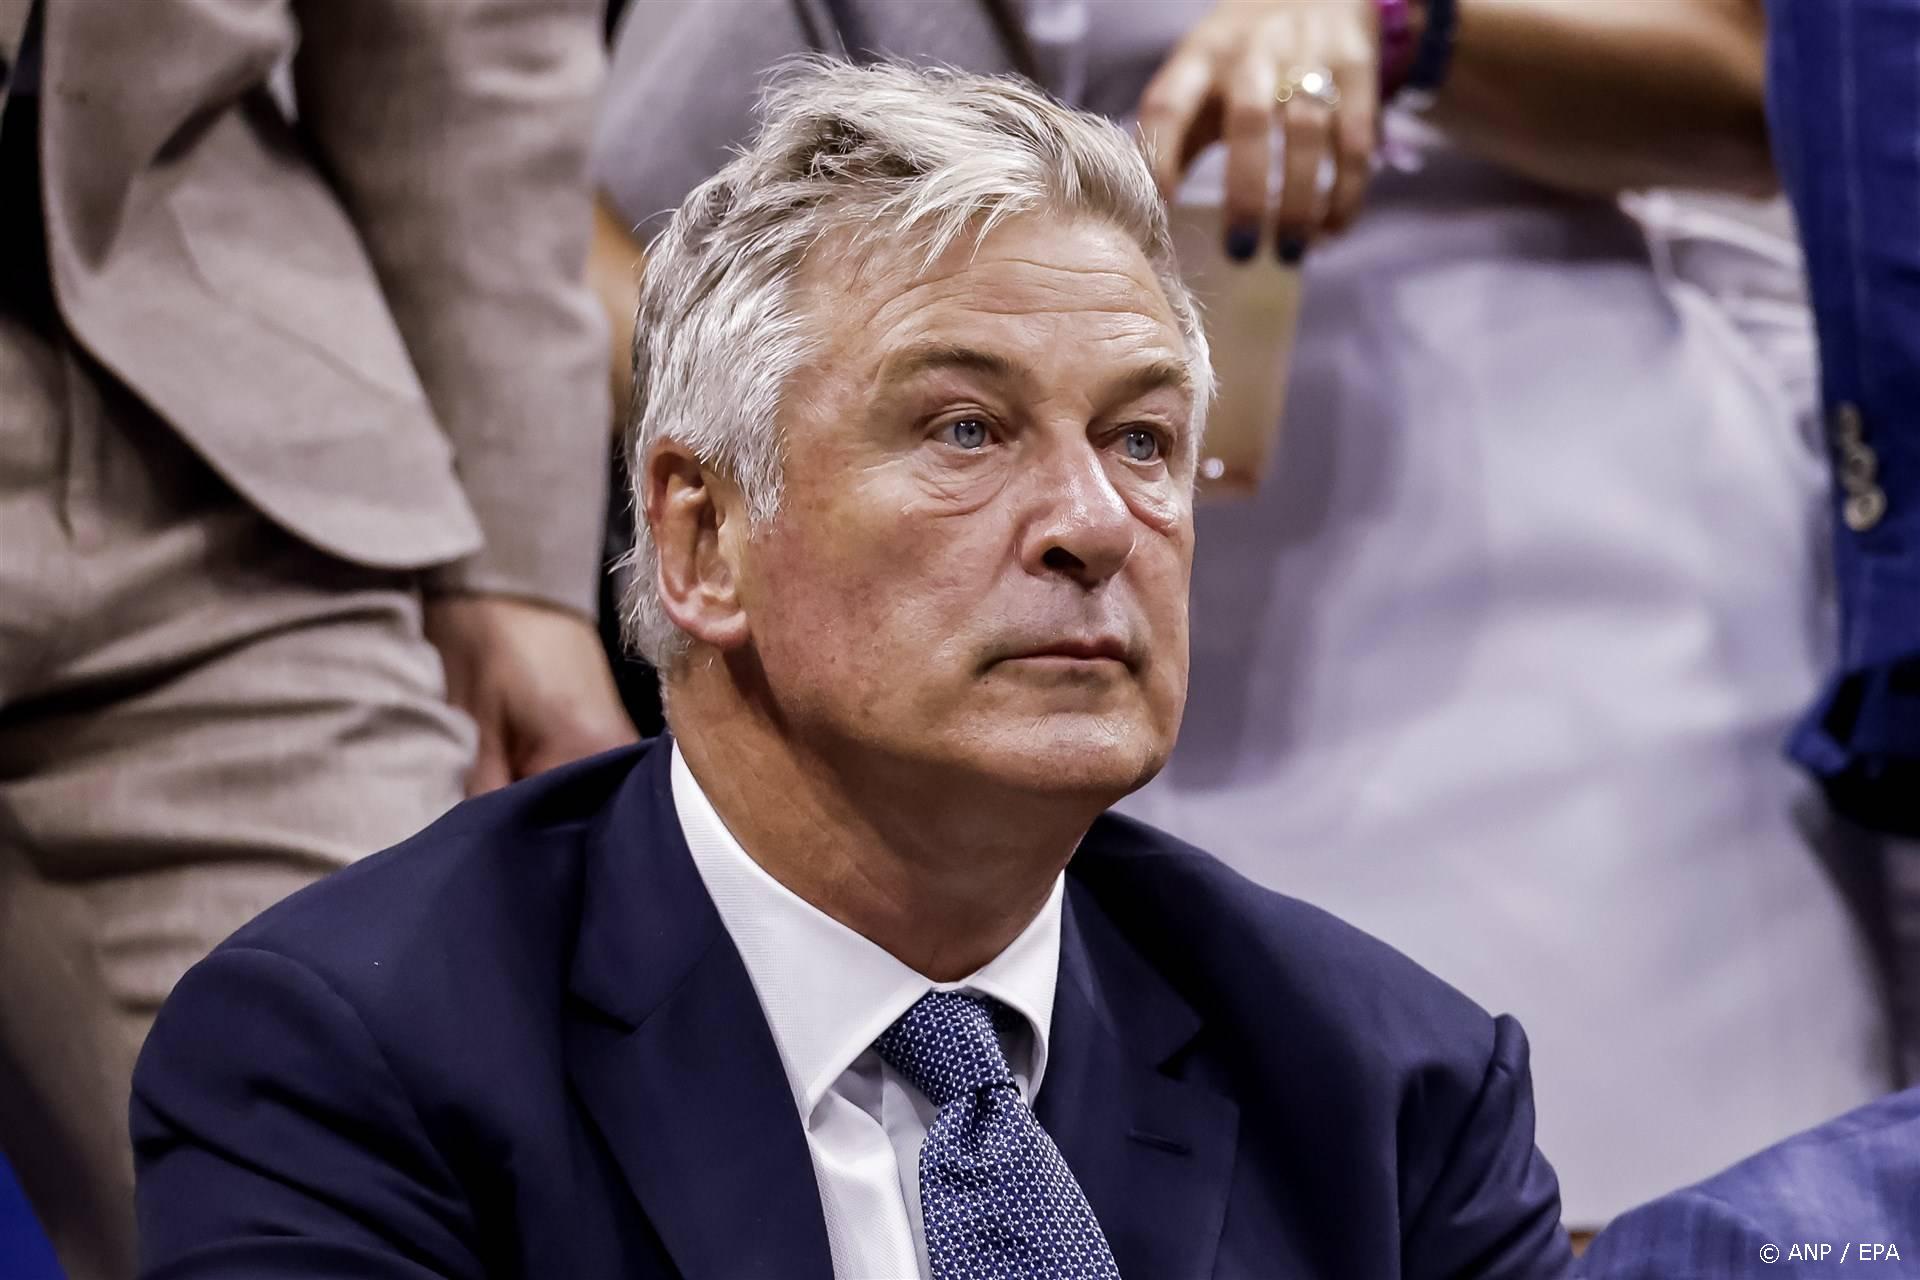 epa10851365 US actor Alec Baldwin attends the women's singles final match between Coco Gauff of the United States and Aryna Sabalenka of Belarus during the US Open Tennis Championships at the USTA National Tennis Center in Flushing Meadows, New York, 09 September 2023. The US Open runs from 28 August through 10 September.  EPA/CJ GUNTHER